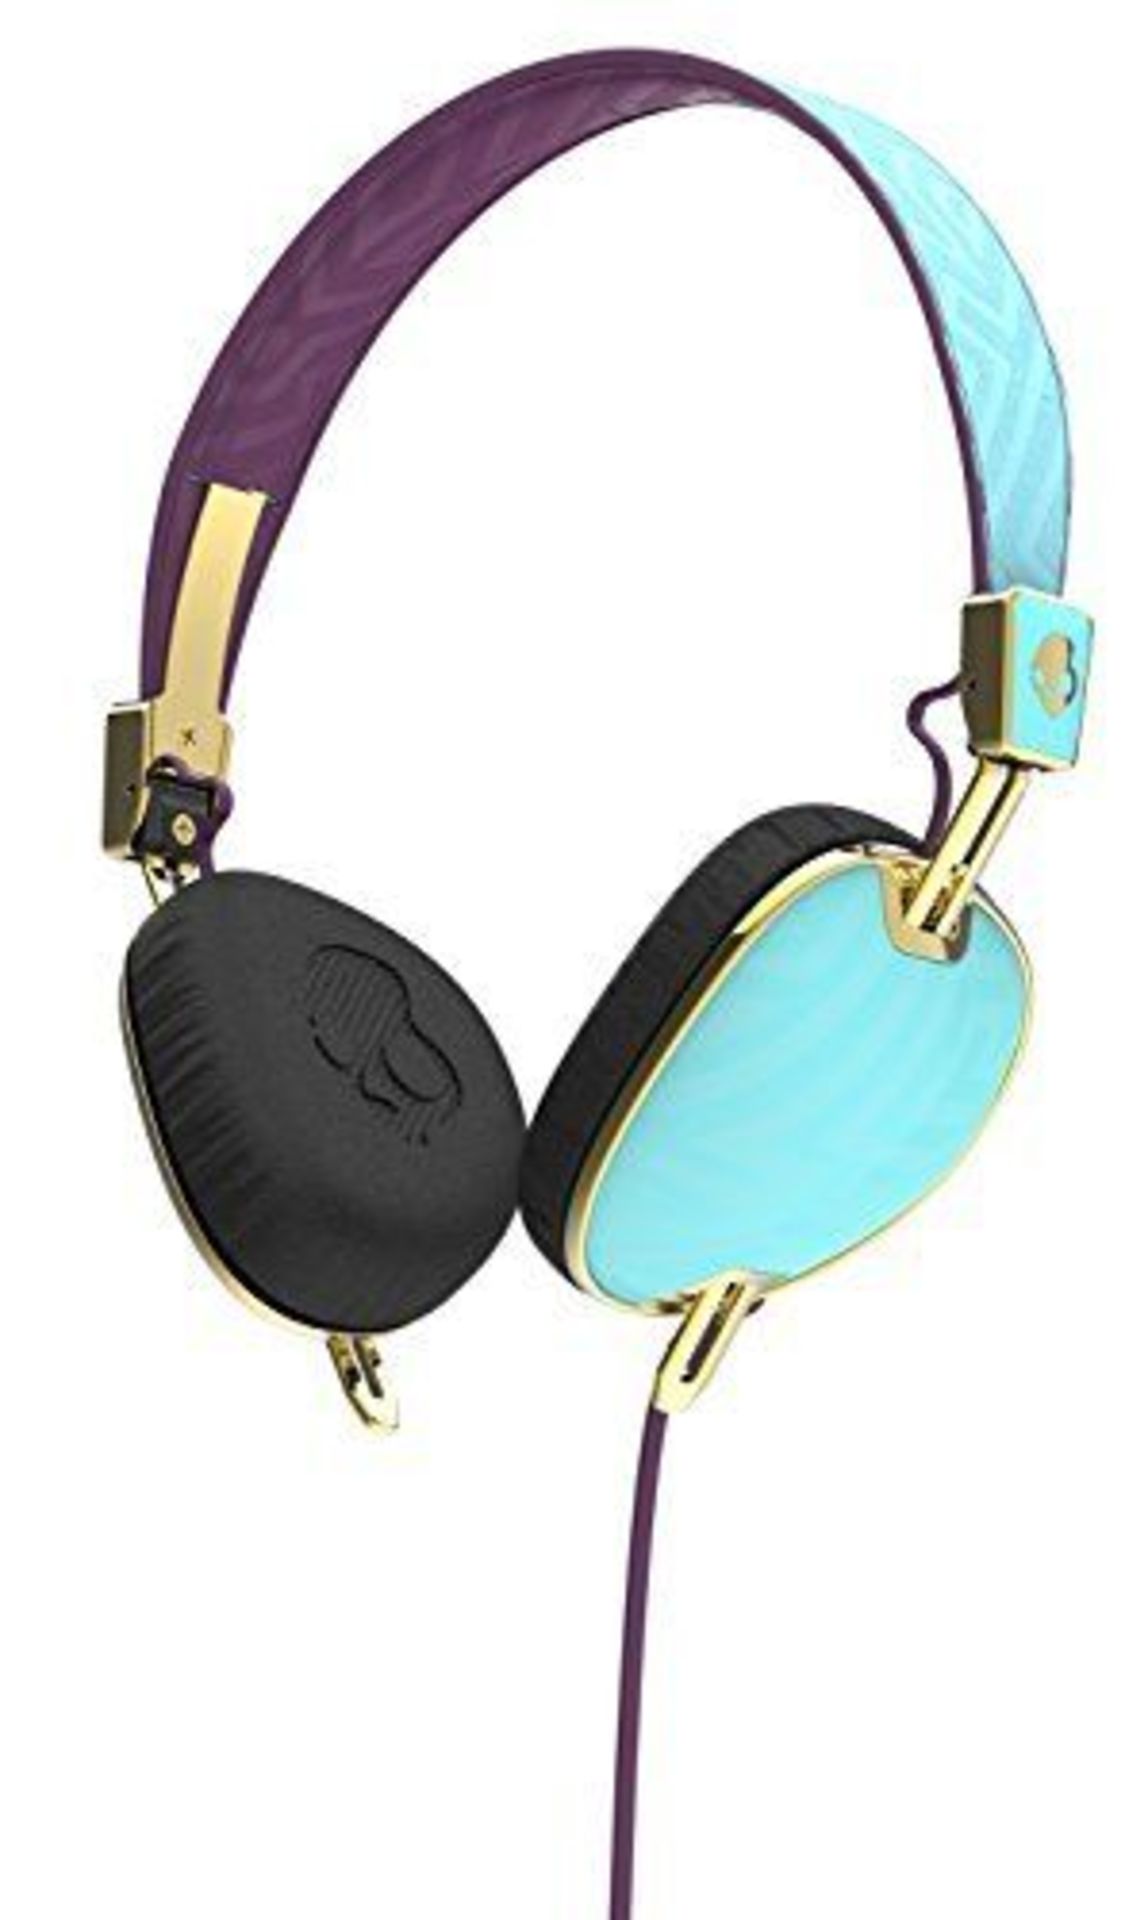 V Brand New Skullcandy Knockout On-Ear Headphones with Three Button Mic/Controller - Robin/Smoked